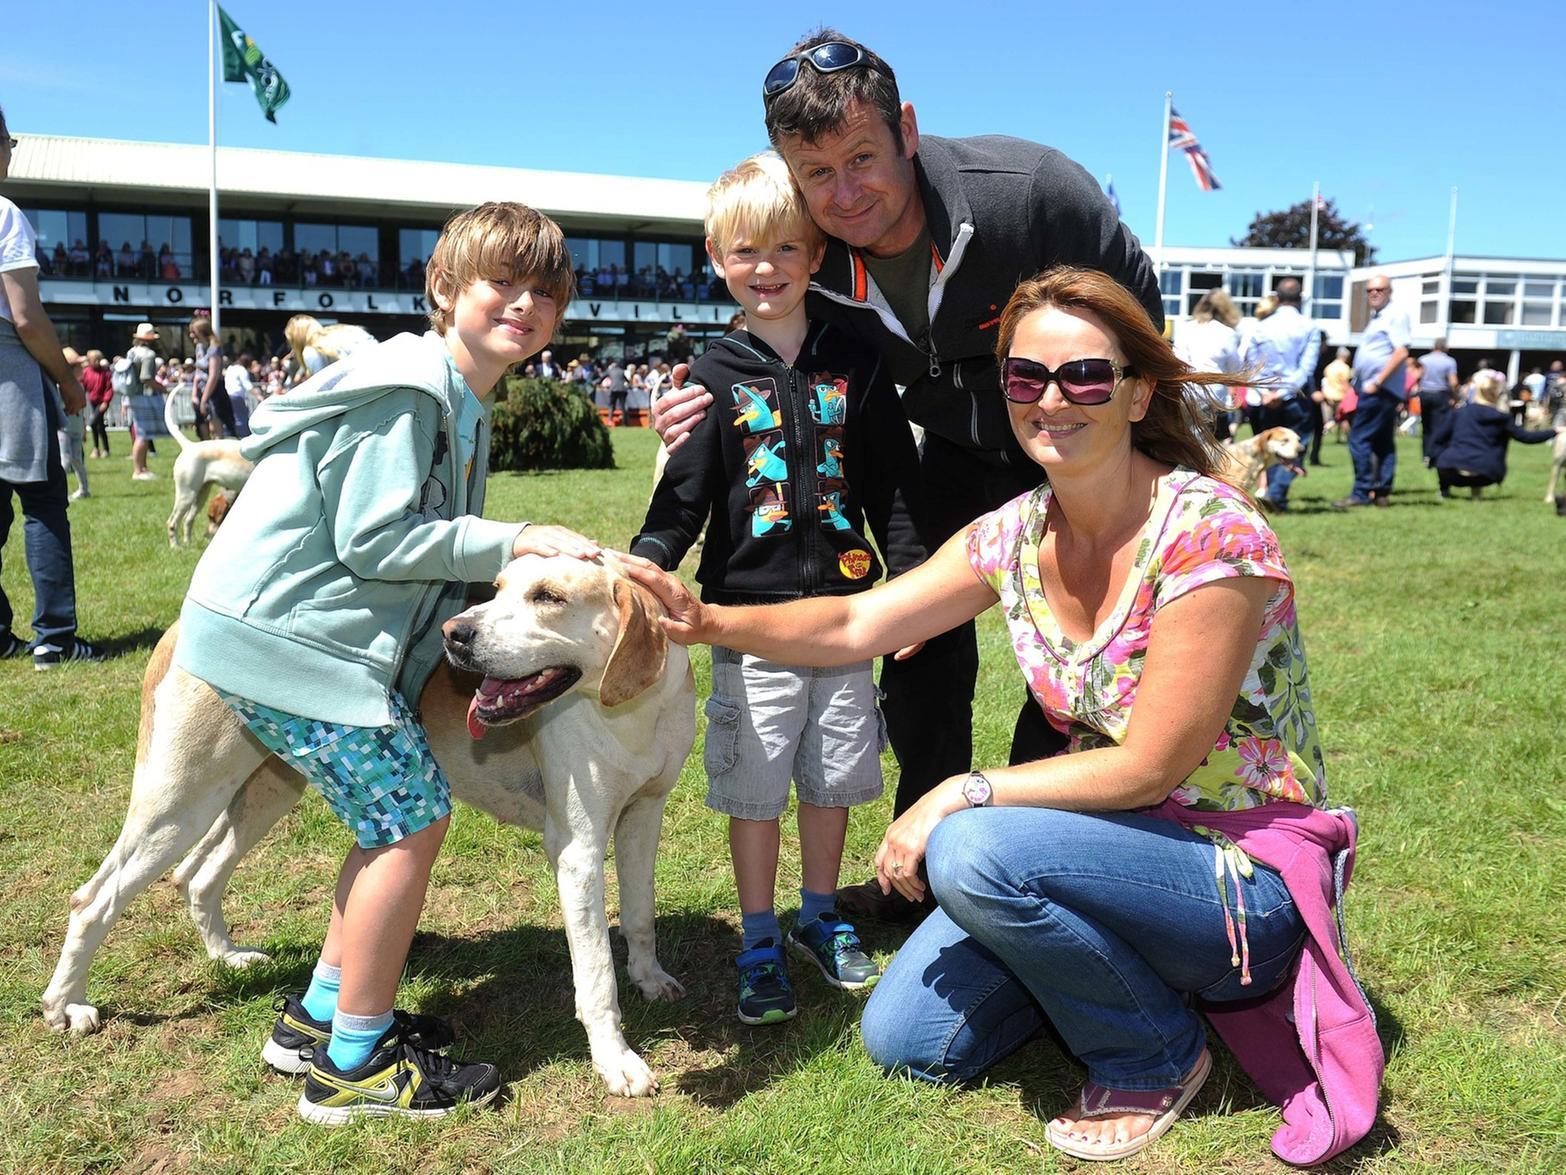 This year's South of England Agricultural Society Summer Show will take place from Thursday, June 11 to Saturday, June 13. Despite last year's bad weather, around 58,000 visitors attended the 53rd extravaganza.

The three-day show welcomed visitors of all ages and interests from across the south east and afar. The 50-acre showground hosted a jam-packed programme of entertainment and top quality agricultural, equestrian and craftsmanship competition with over 800 livestock entries, 1,700 show jumping and showing competitors, and 90 Young Artisan Competition entries, along with 5 jaw-dropping displays from the Bolddog Lings motorcycle stunt team, and one very special visit from the childrens picture book character The Gruffalo. All this on top of the shows epic shopping village featuring around 500 stands, a live music stage, Wine Walk, heritage zone, funfair and more.